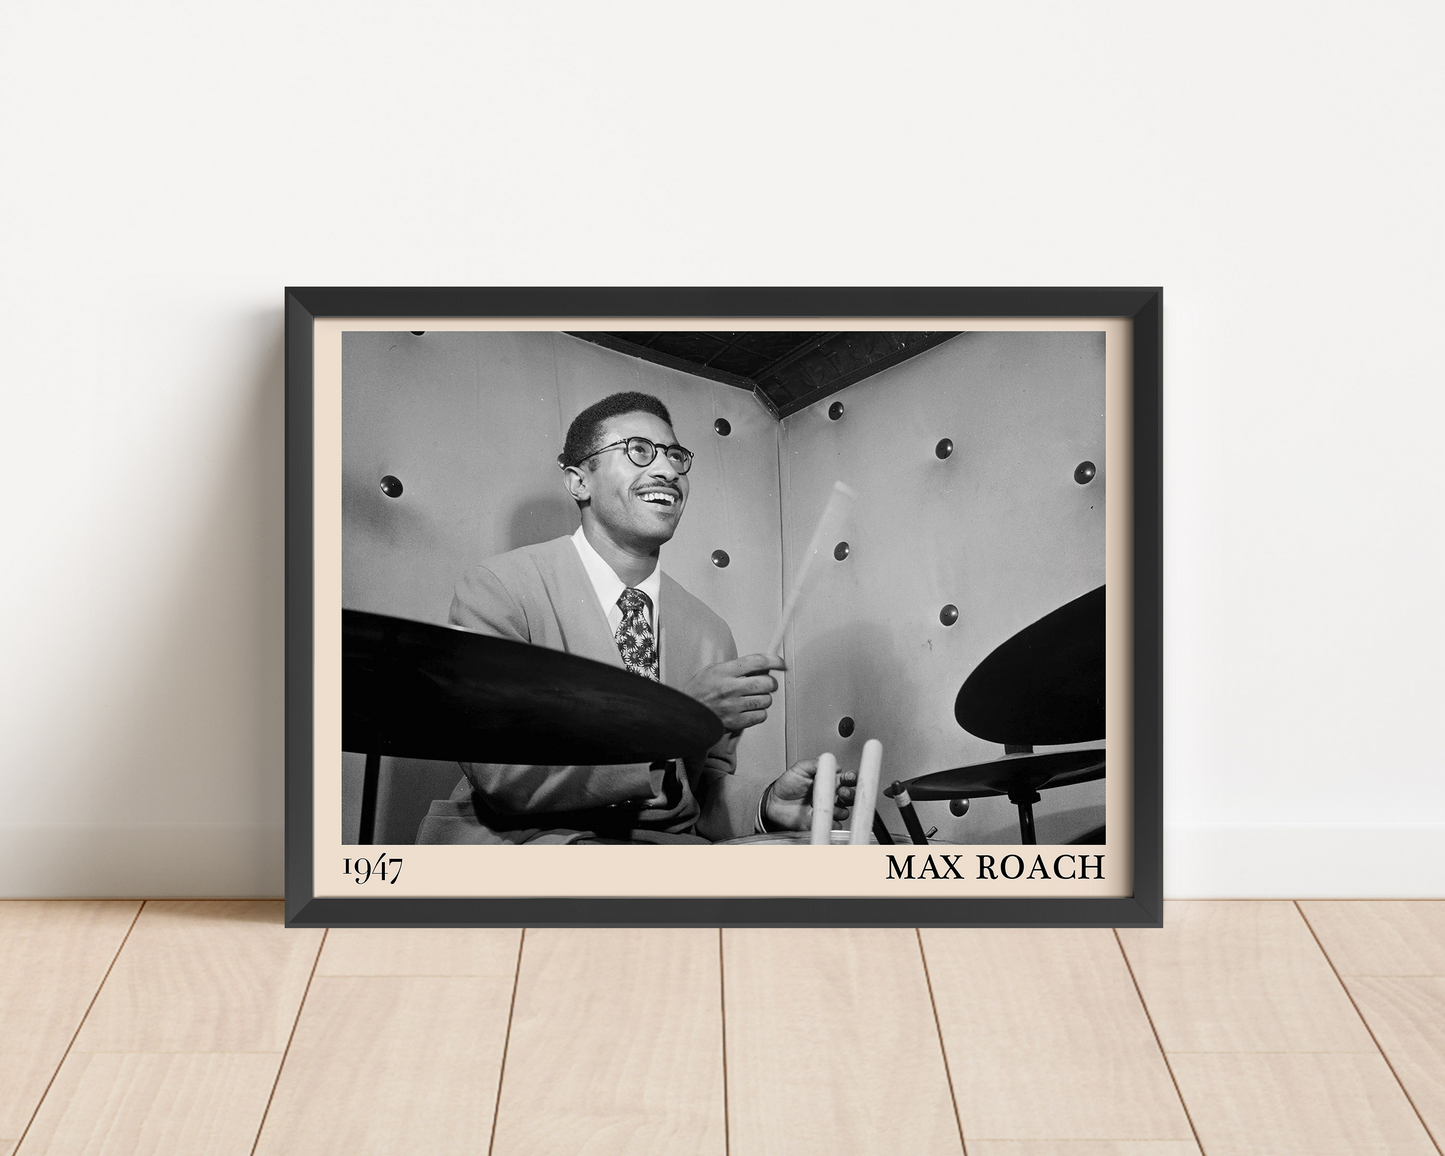 1947 photograph of Max Roach playing the drums, transformed into a stylish black-framed jazz poster leaning on a white wall